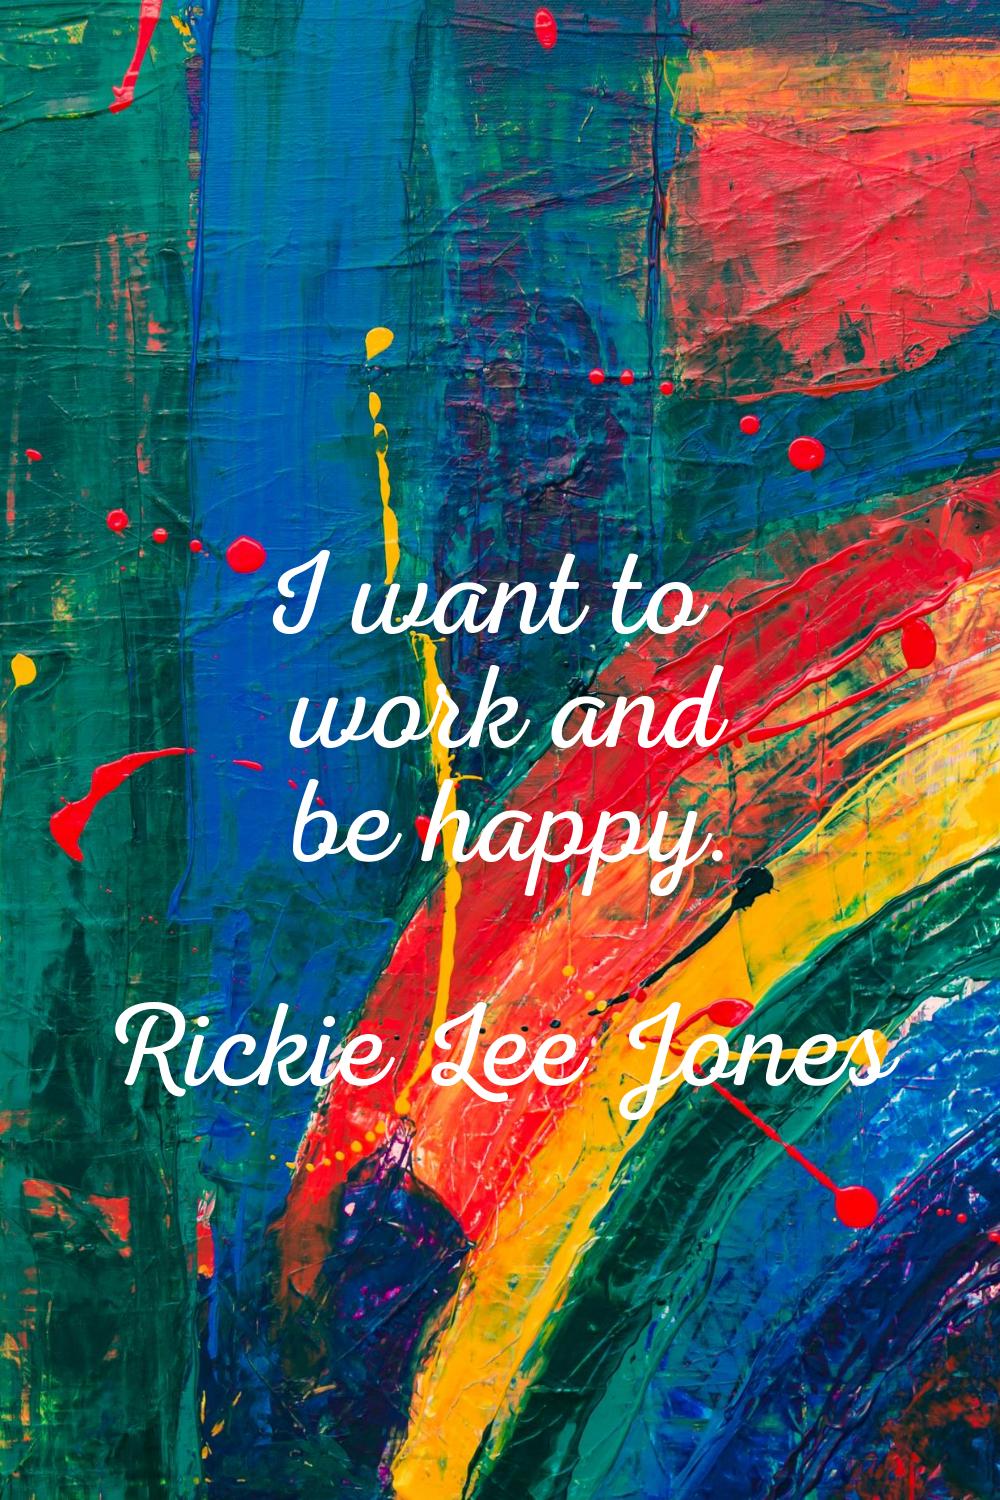 I want to work and be happy.